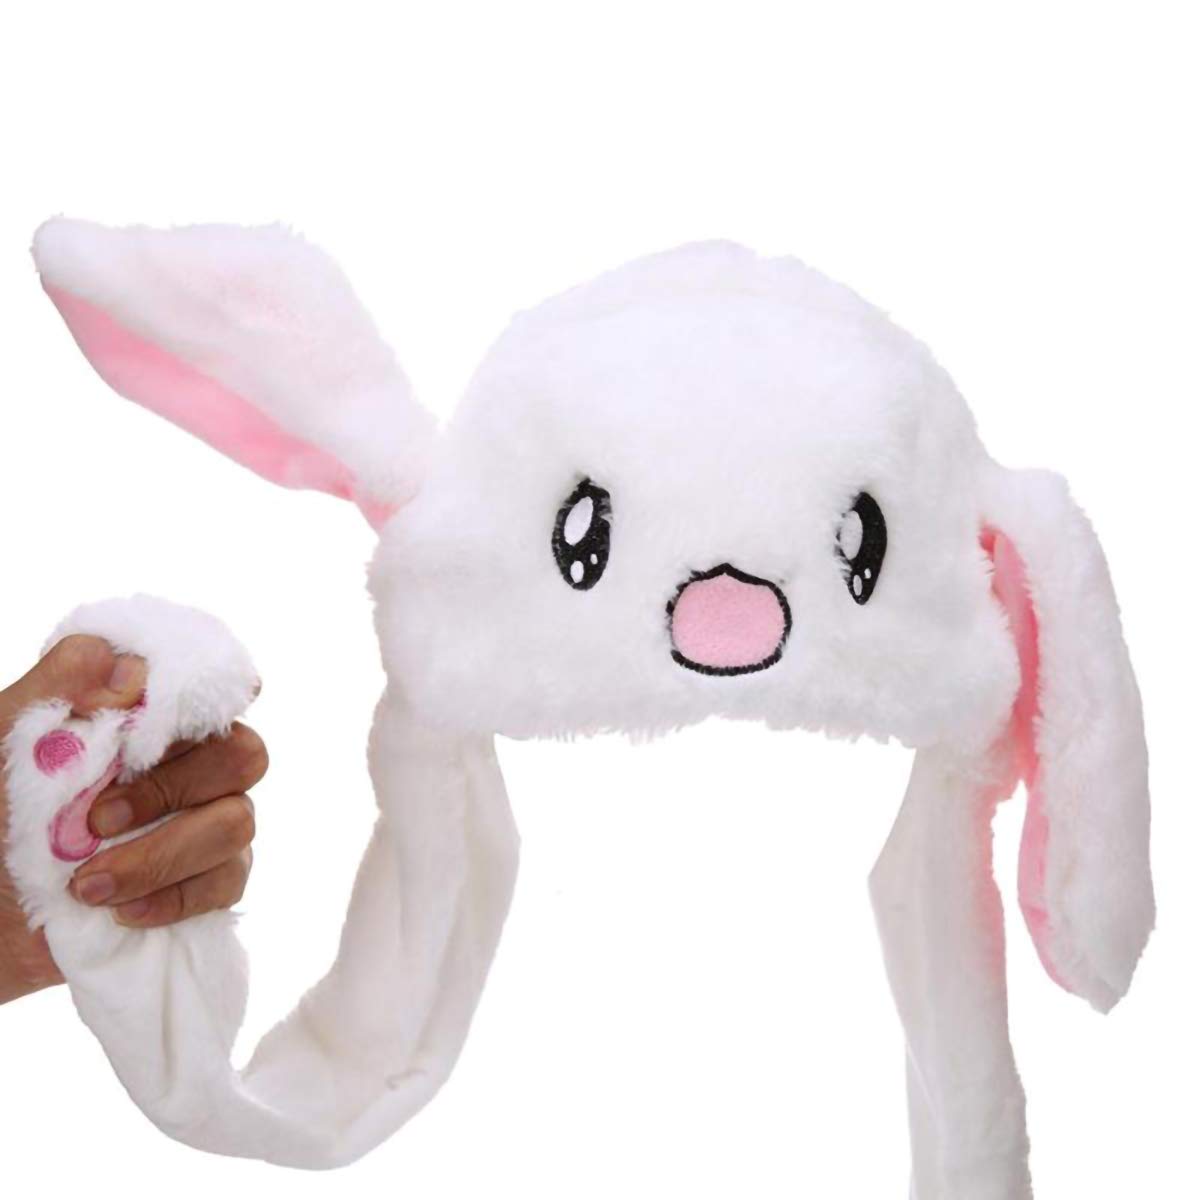 IronBuddy Rabbit Hat Ear Moving Jumping Hat Funny Bunny Plush Hat Cap for Women Girls, Cosplay Christmas Party Holiday Hat (White)